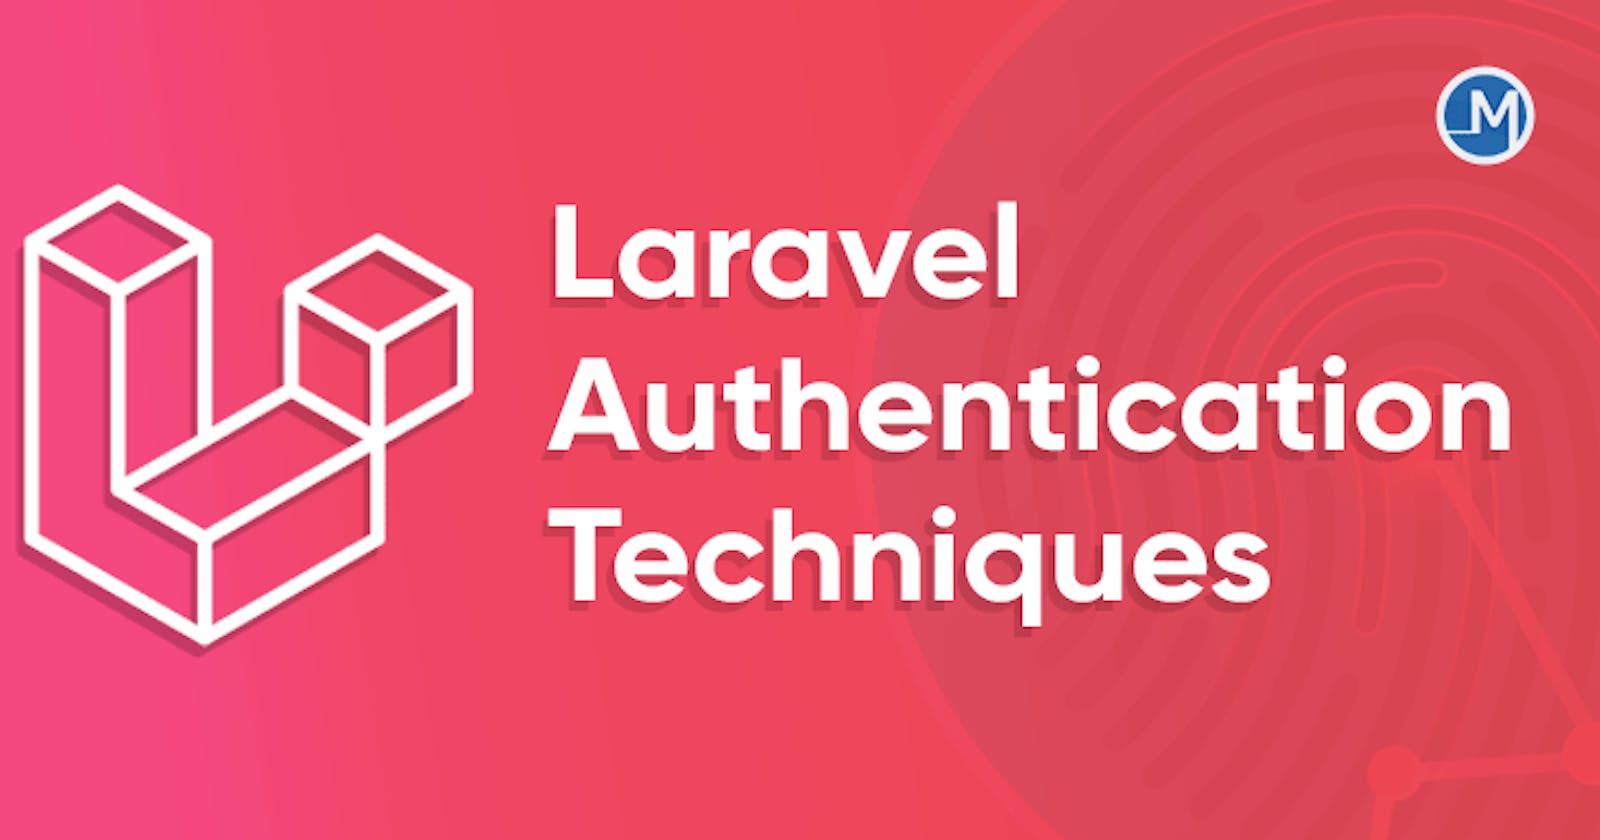 How to use Laravel 8 default Authentication
Easy way.